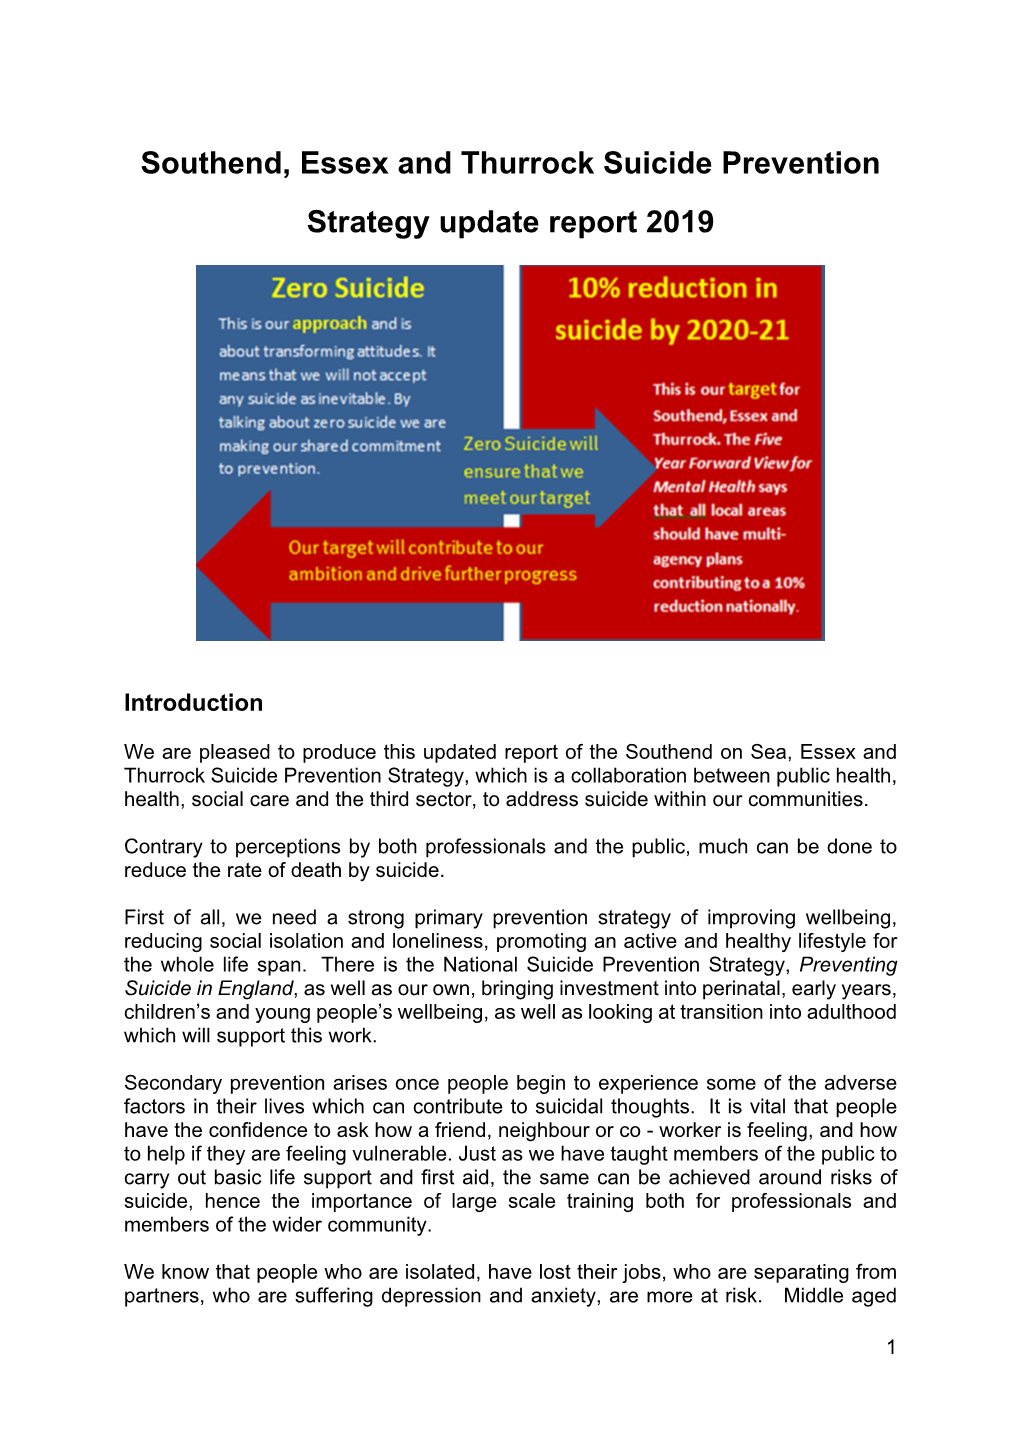 Southend, Essex and Thurrock Suicide Prevention Strategy Update Report 2019